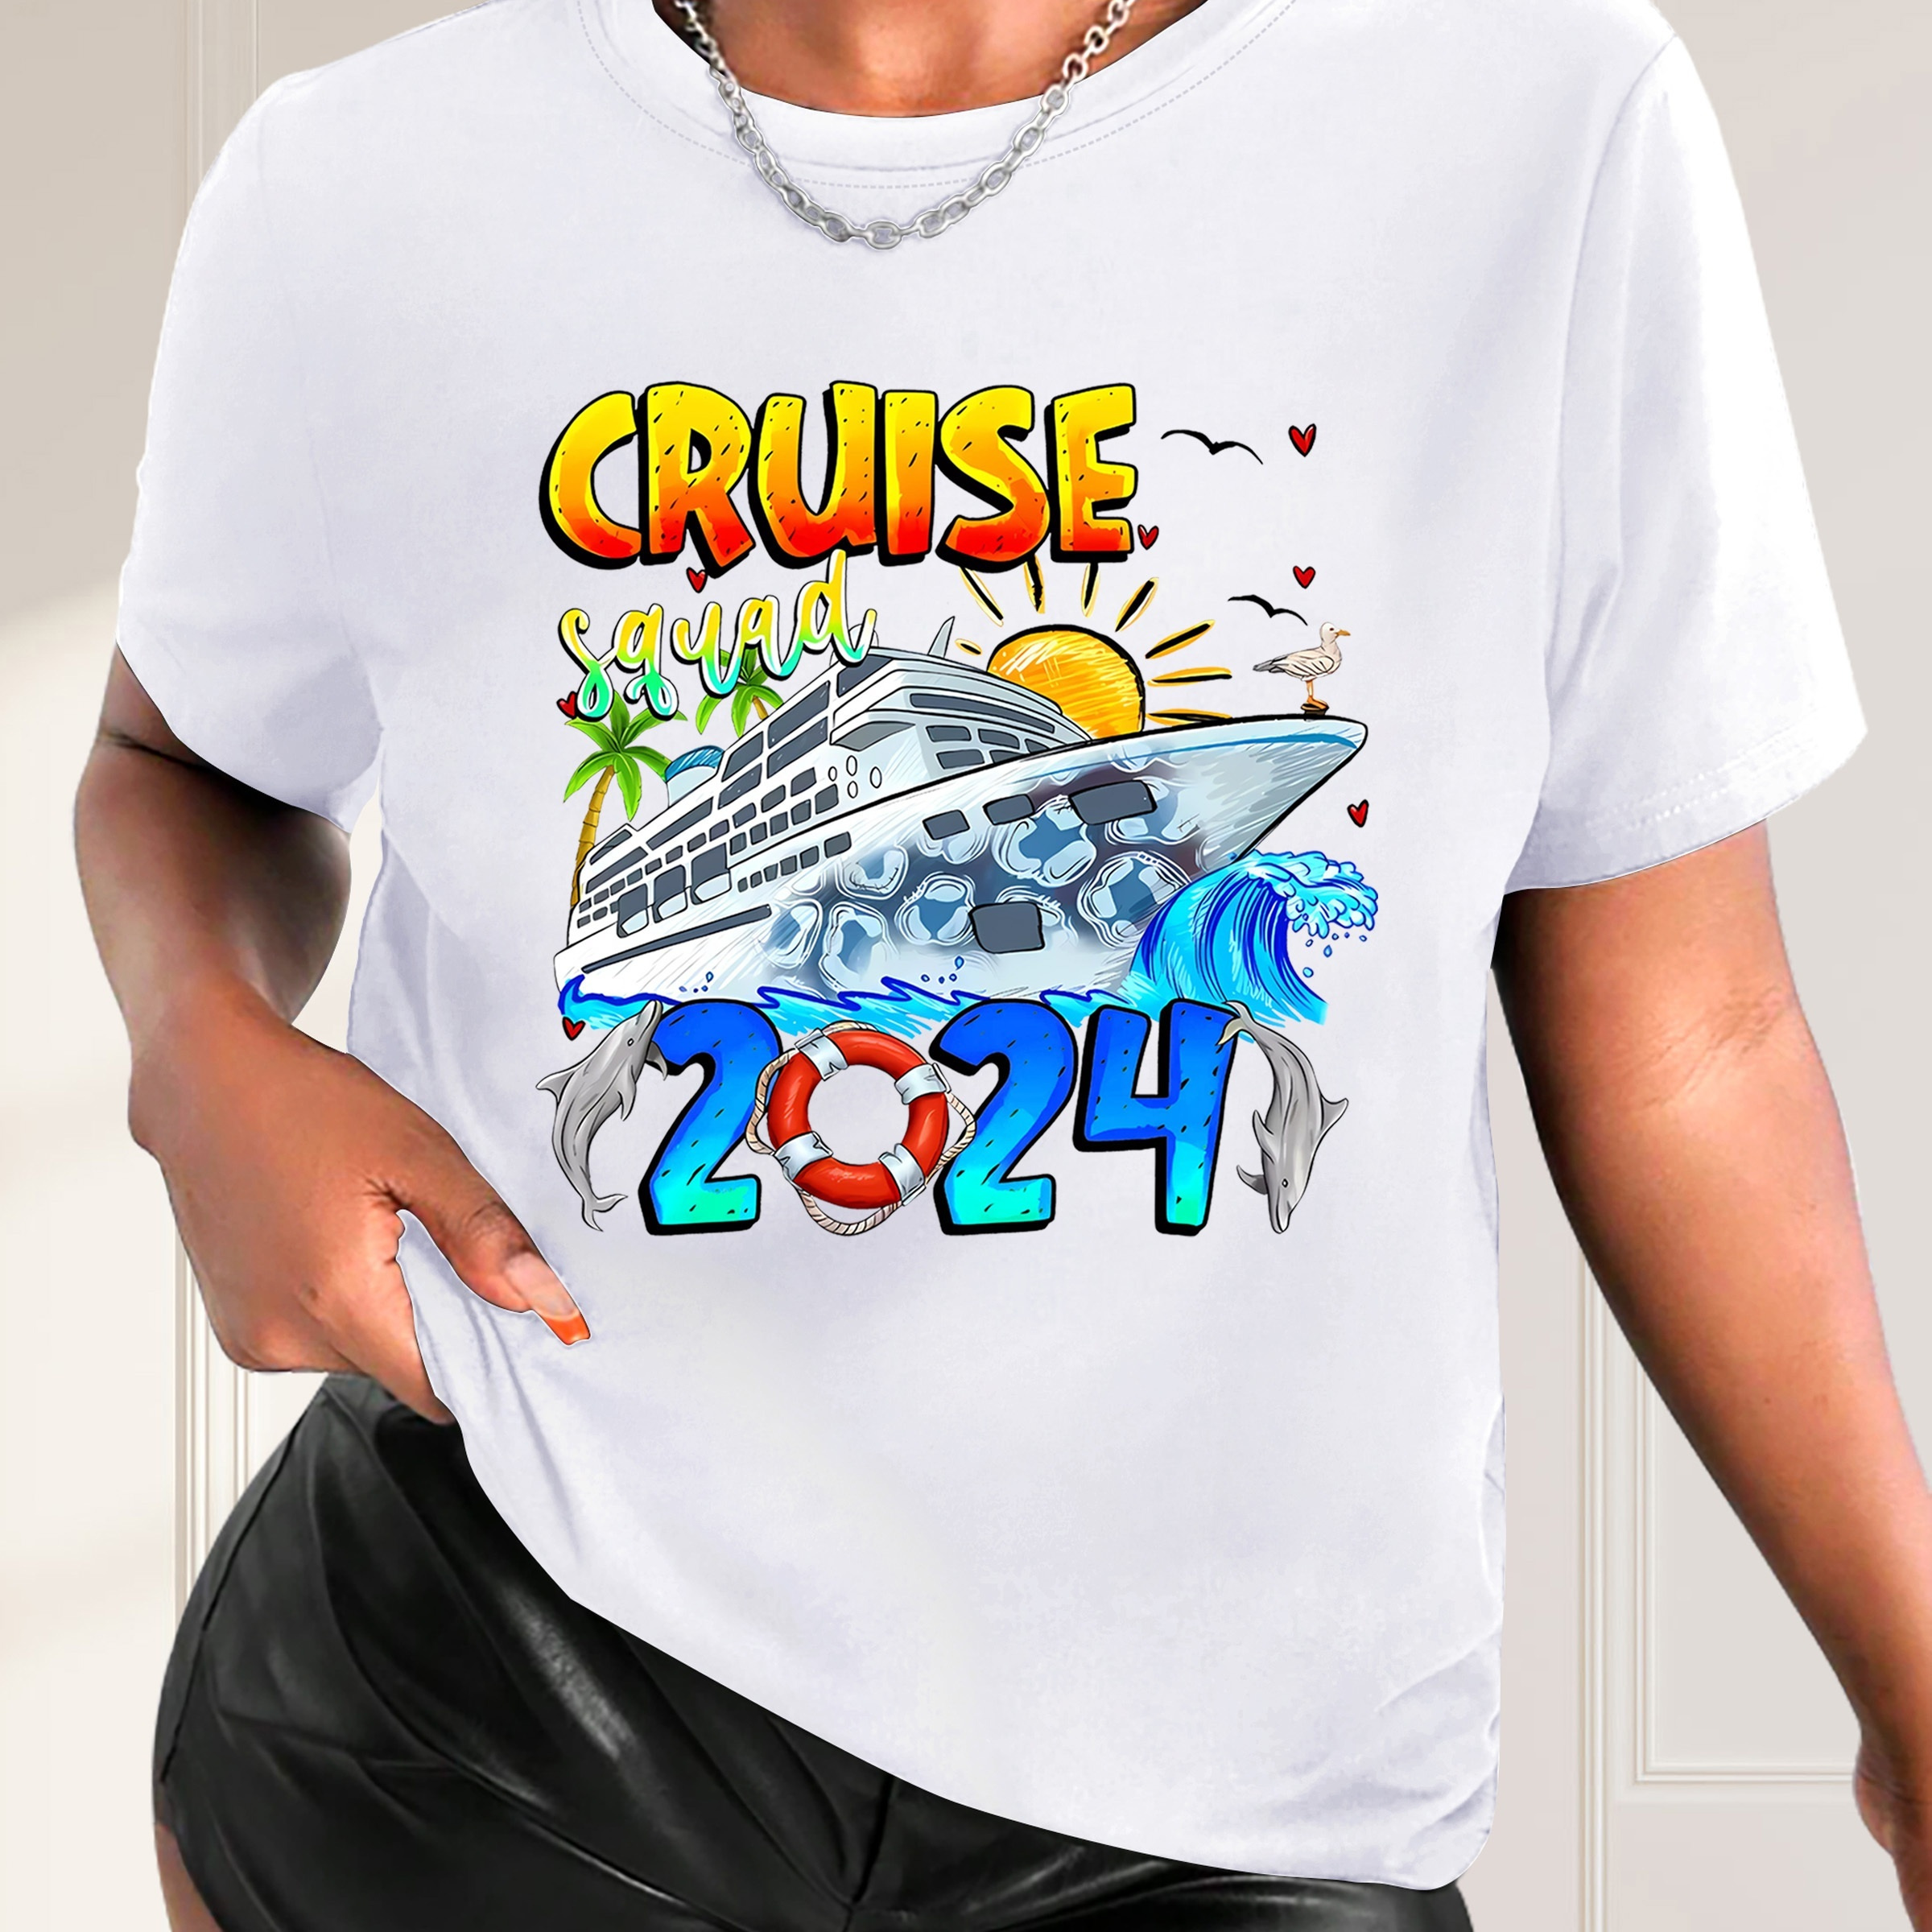 

2024 Cruise Boat Sea Graphic Short Sleeves Sports Tee, Round Neck Workout Causal T-shirt Top, Women's Activewear